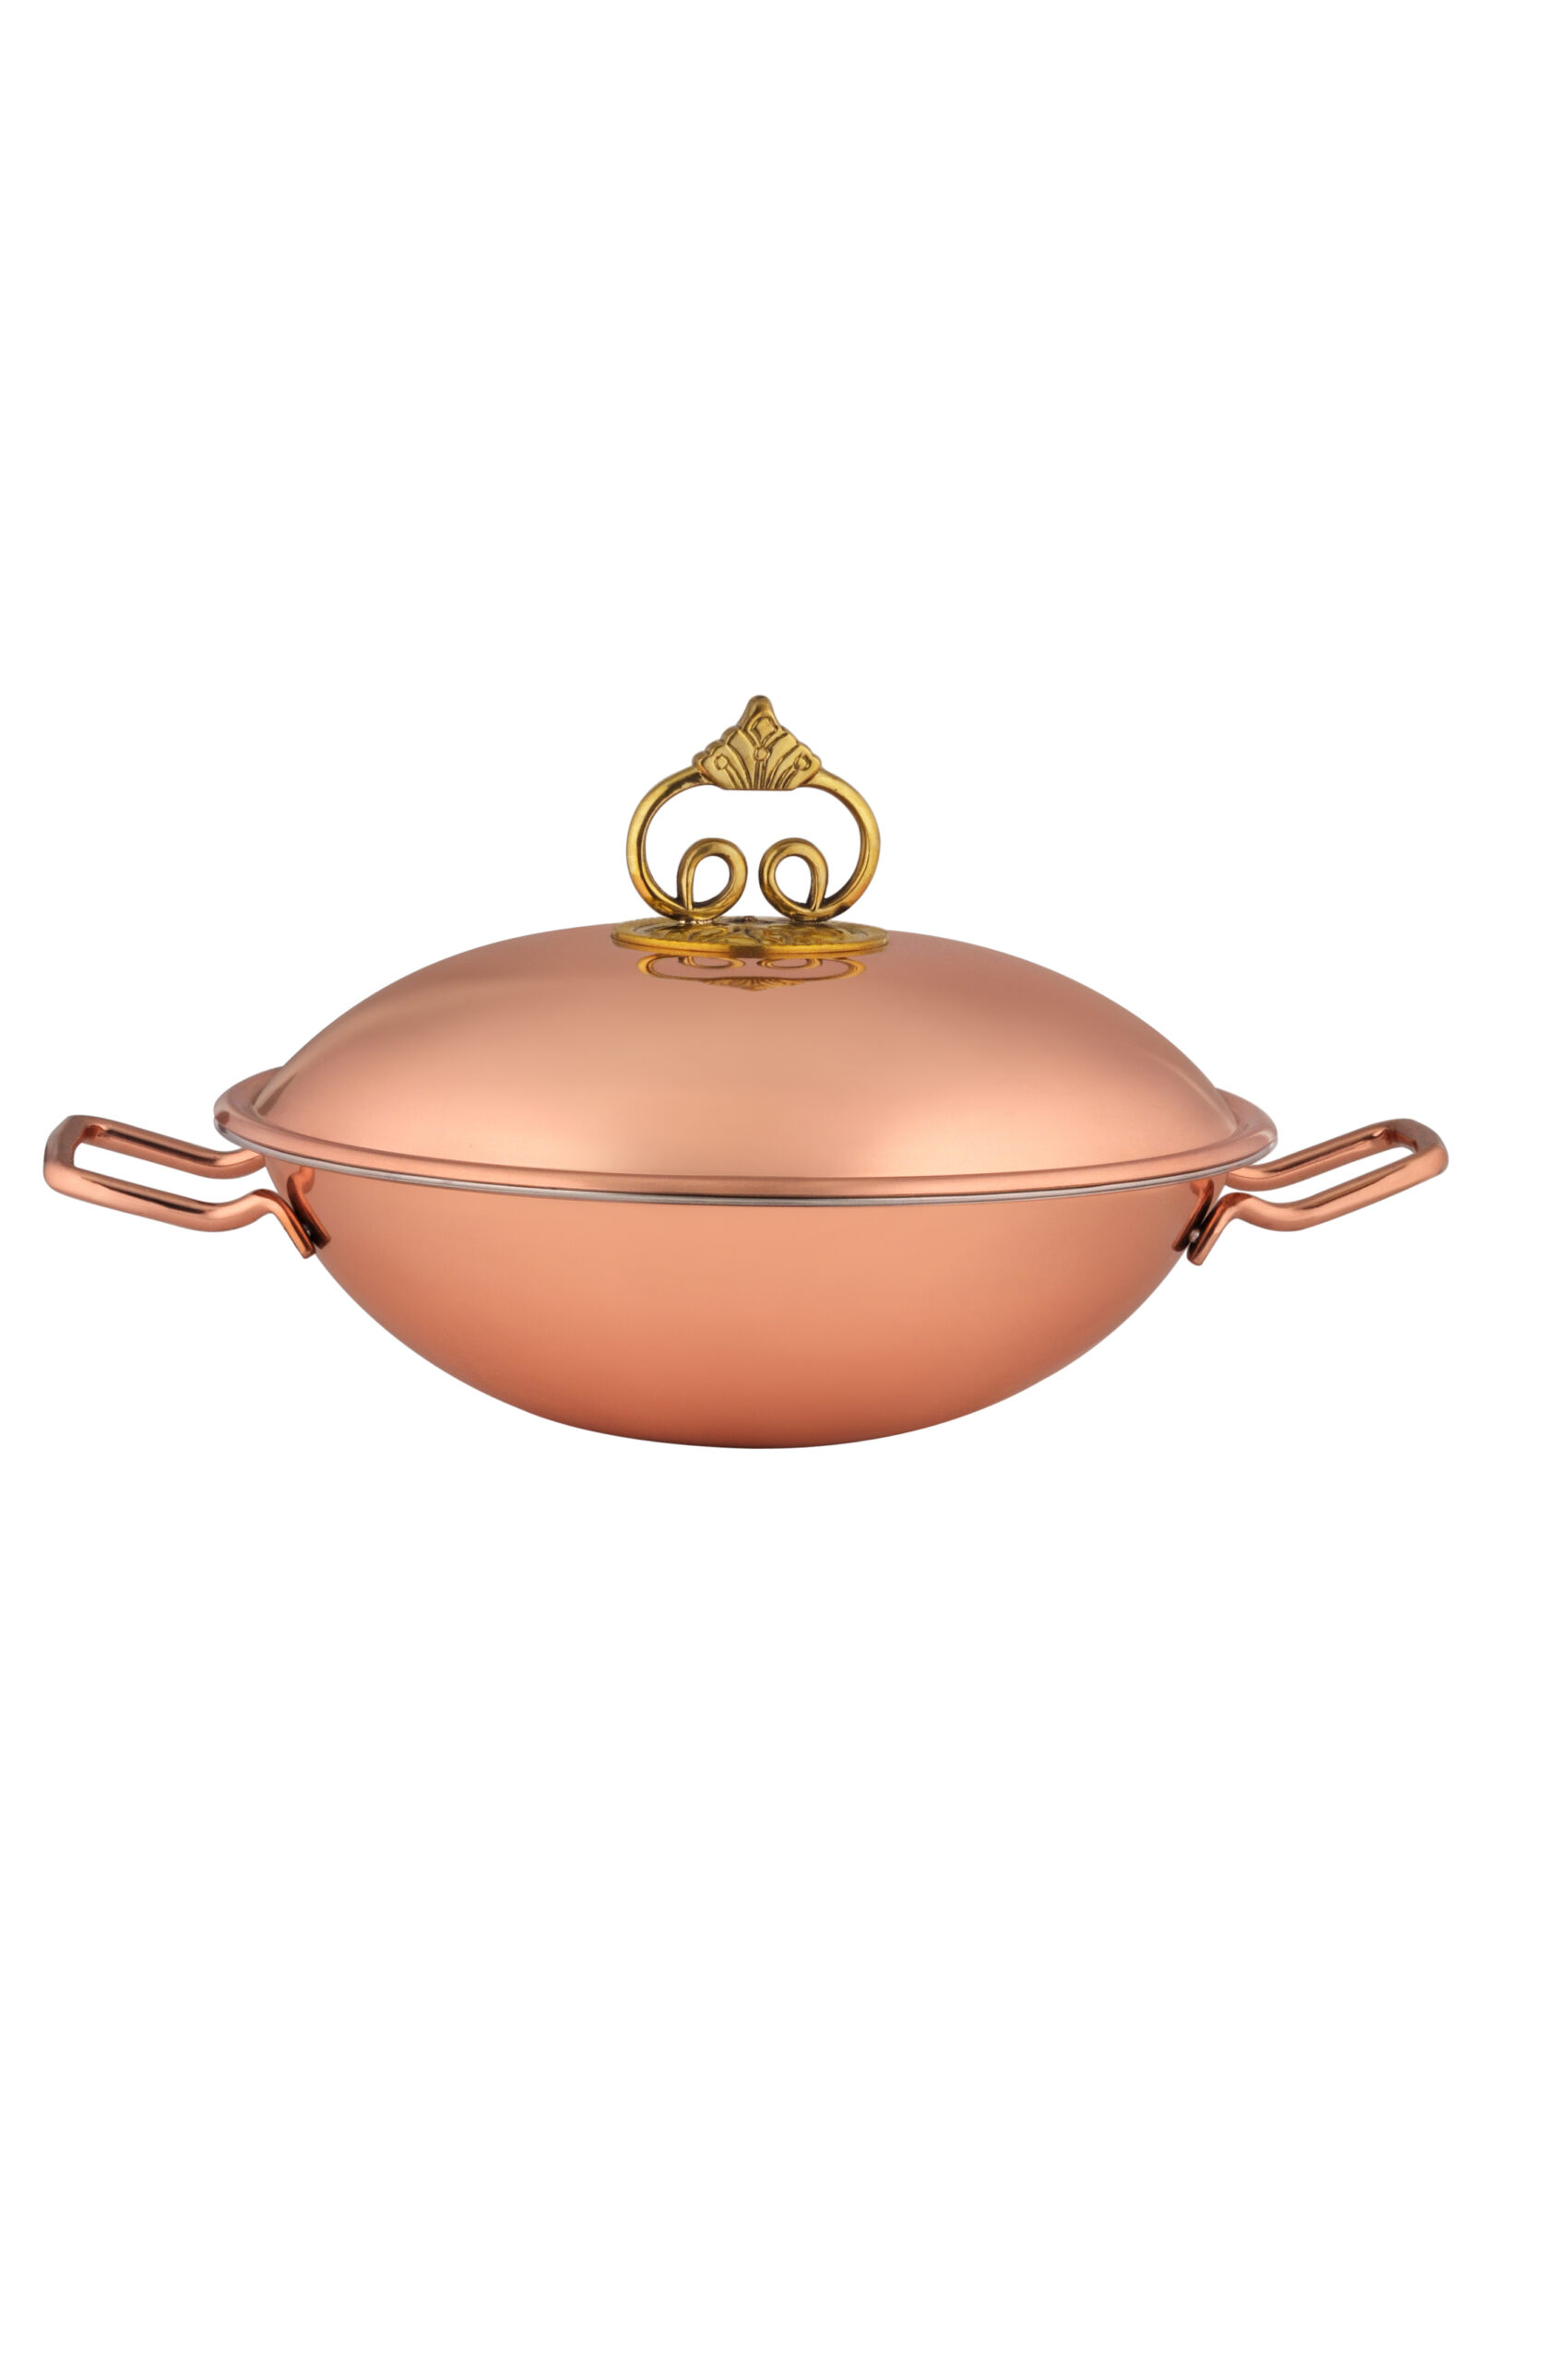 Baroque Mirror Copper Finish Induction wok with Lid